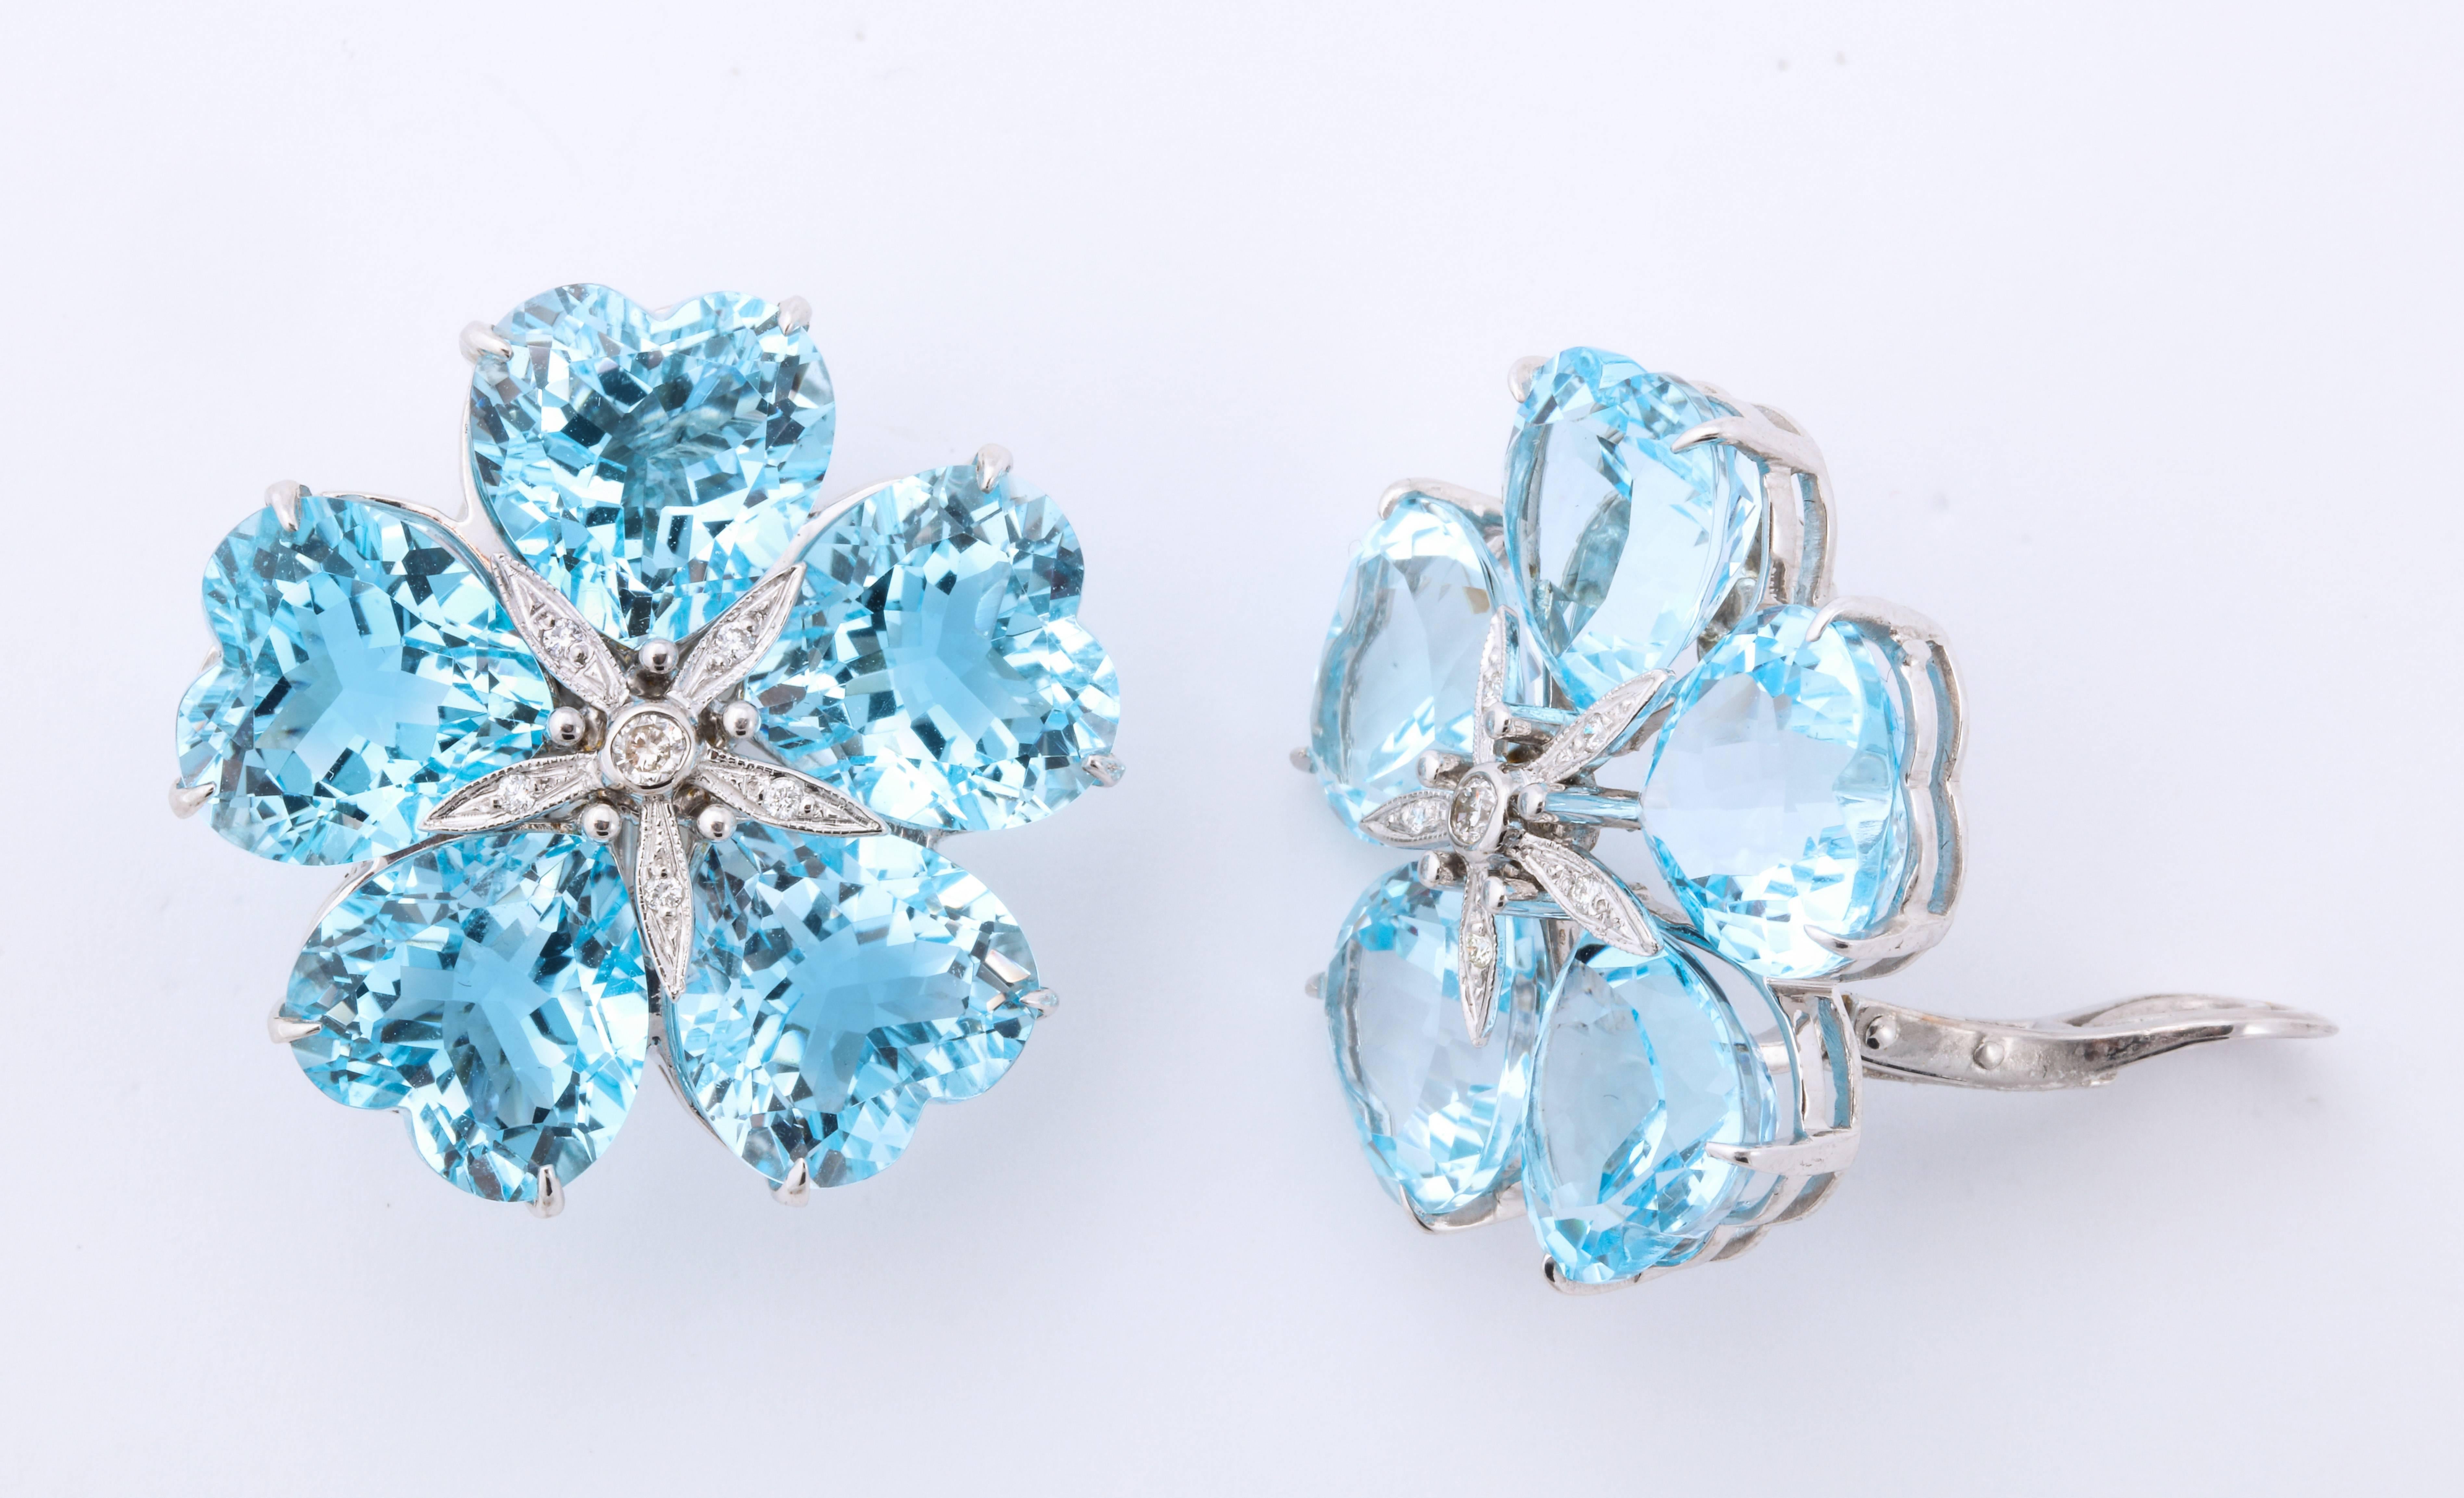 The brightest blue, heart shaped topazes are carefully configured around a diamond center to form a beautiful flower.  Just large enough to make the right impact, without being too heavy, these wonderful earclips are easily wearable- daytime or